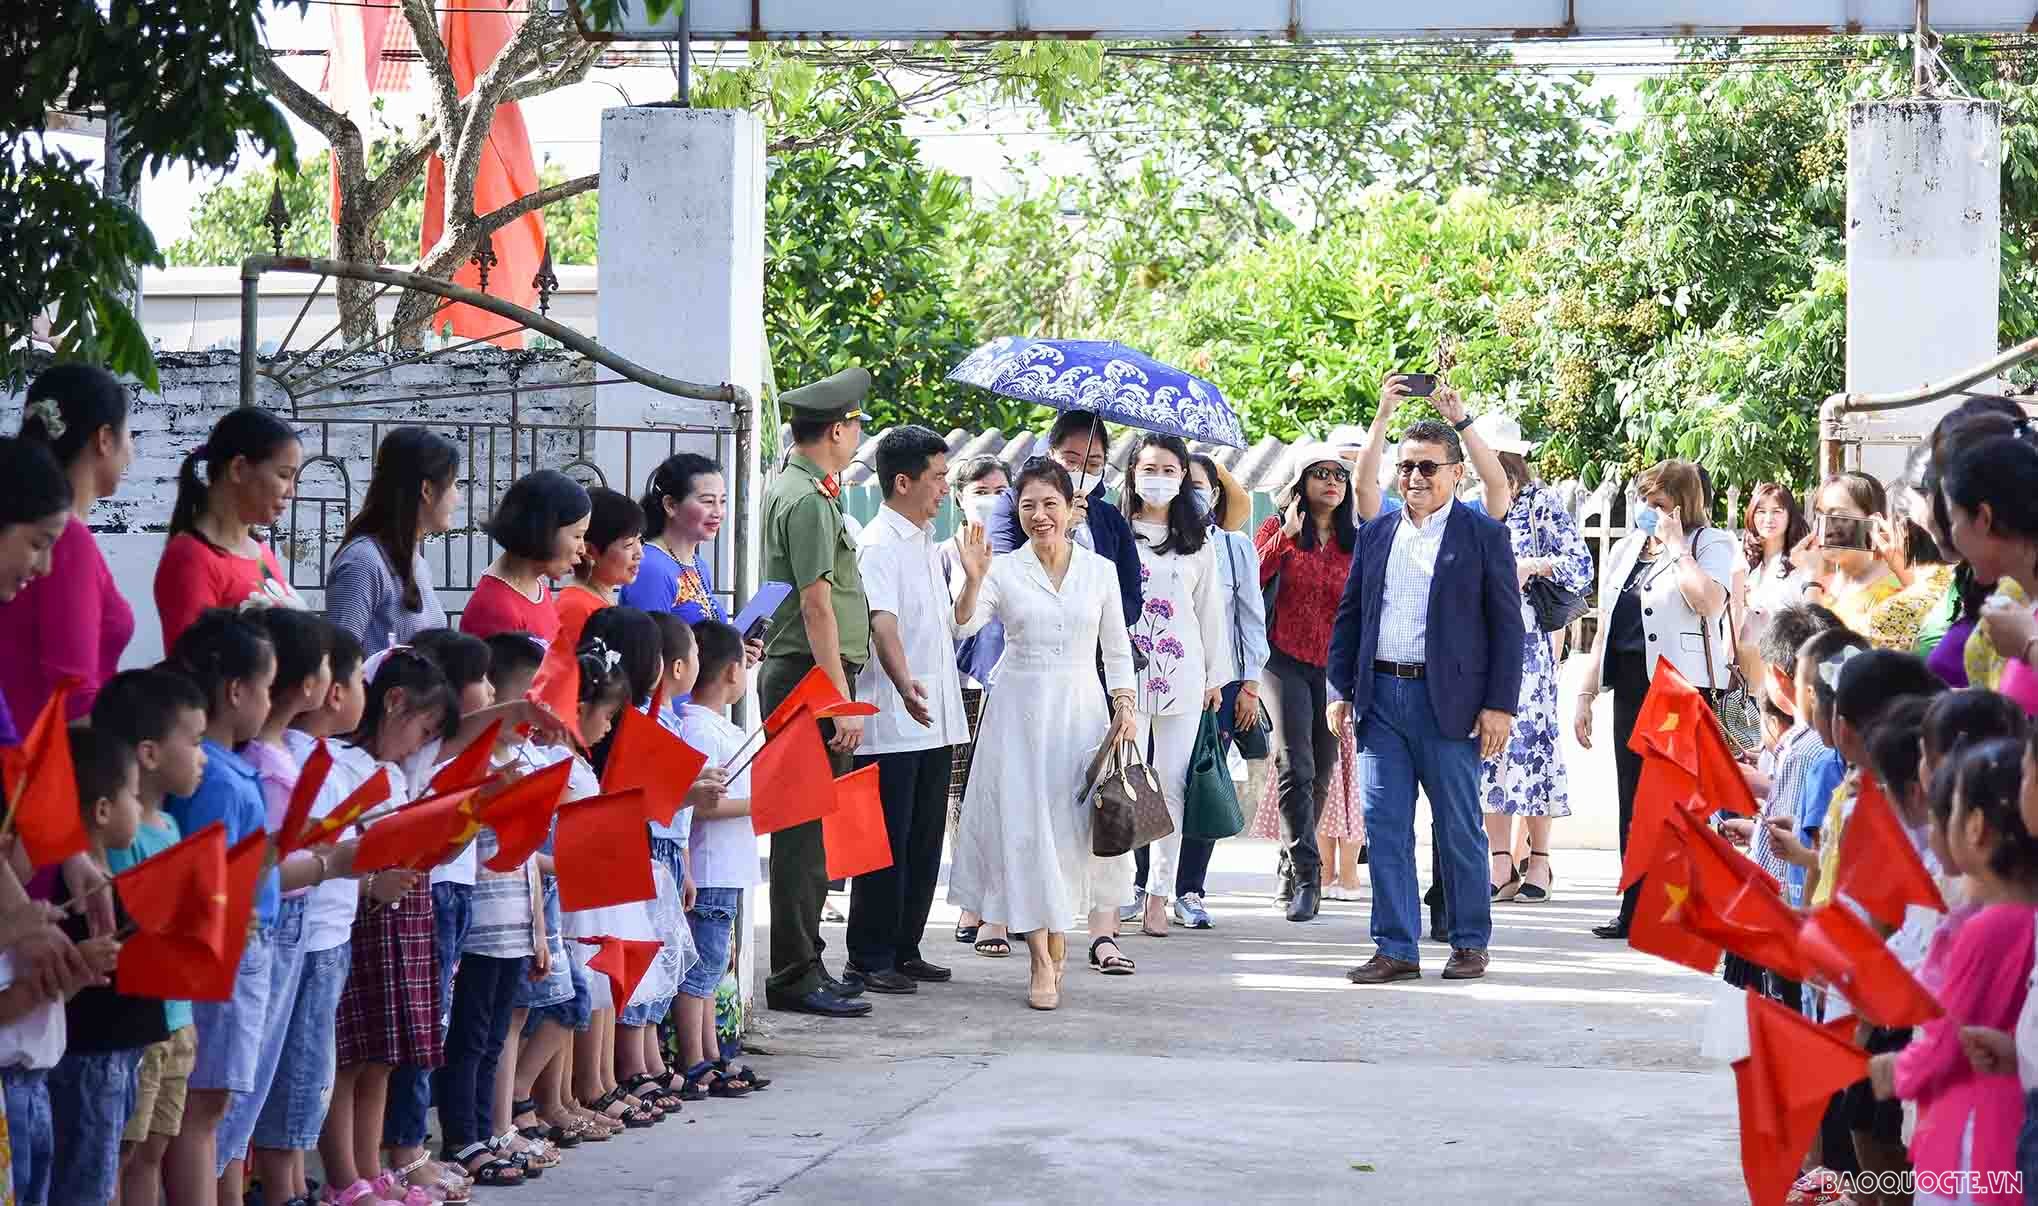 Presents worth 72 million VND given to teachers and students of Hai Duong's kindergarten